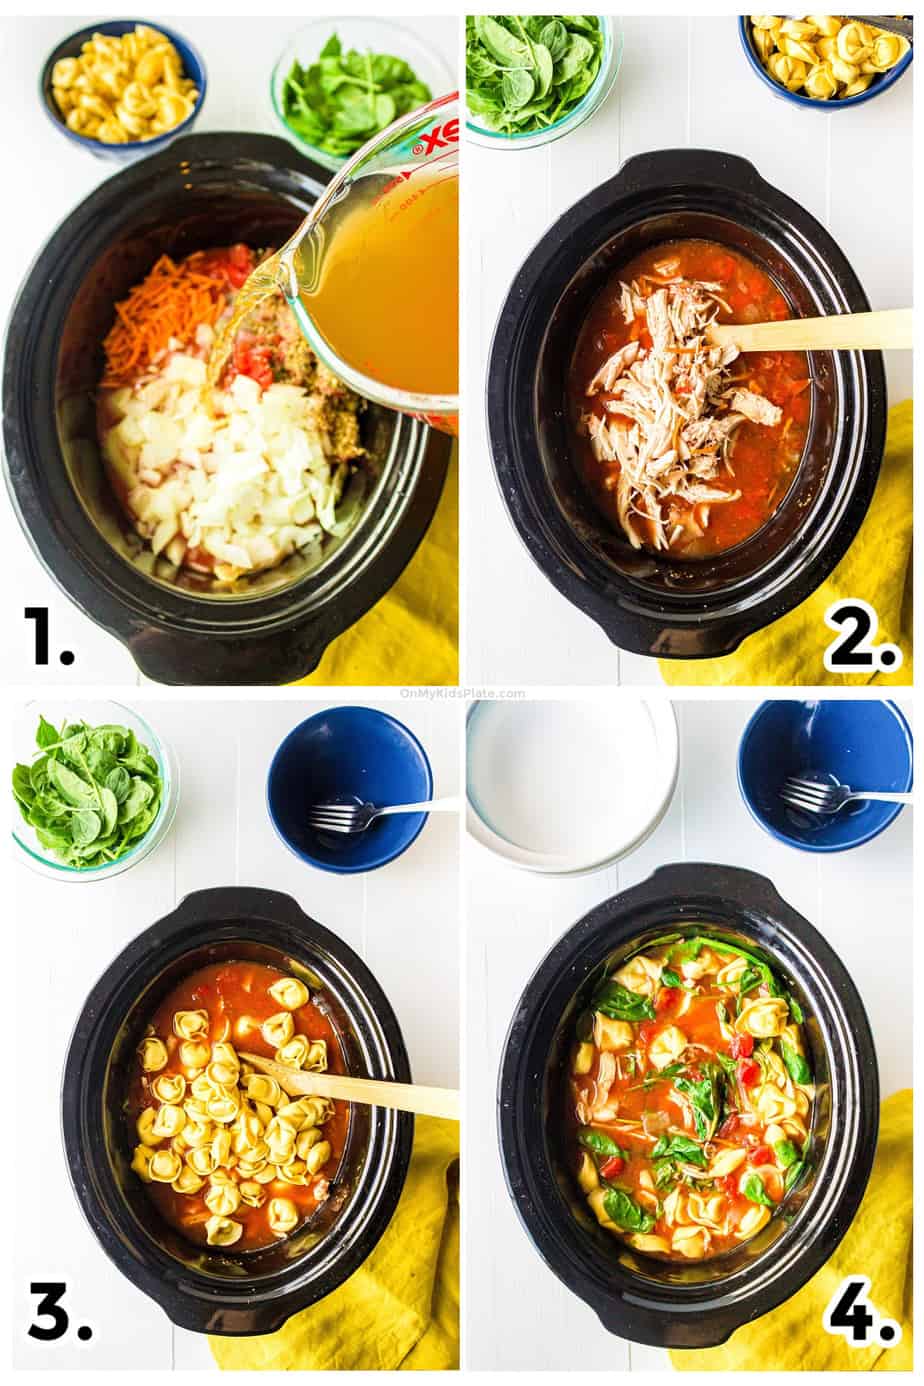 Step by step images adding broth, shredding chicken and adding tortellini and spinach to the crock pot at the right times